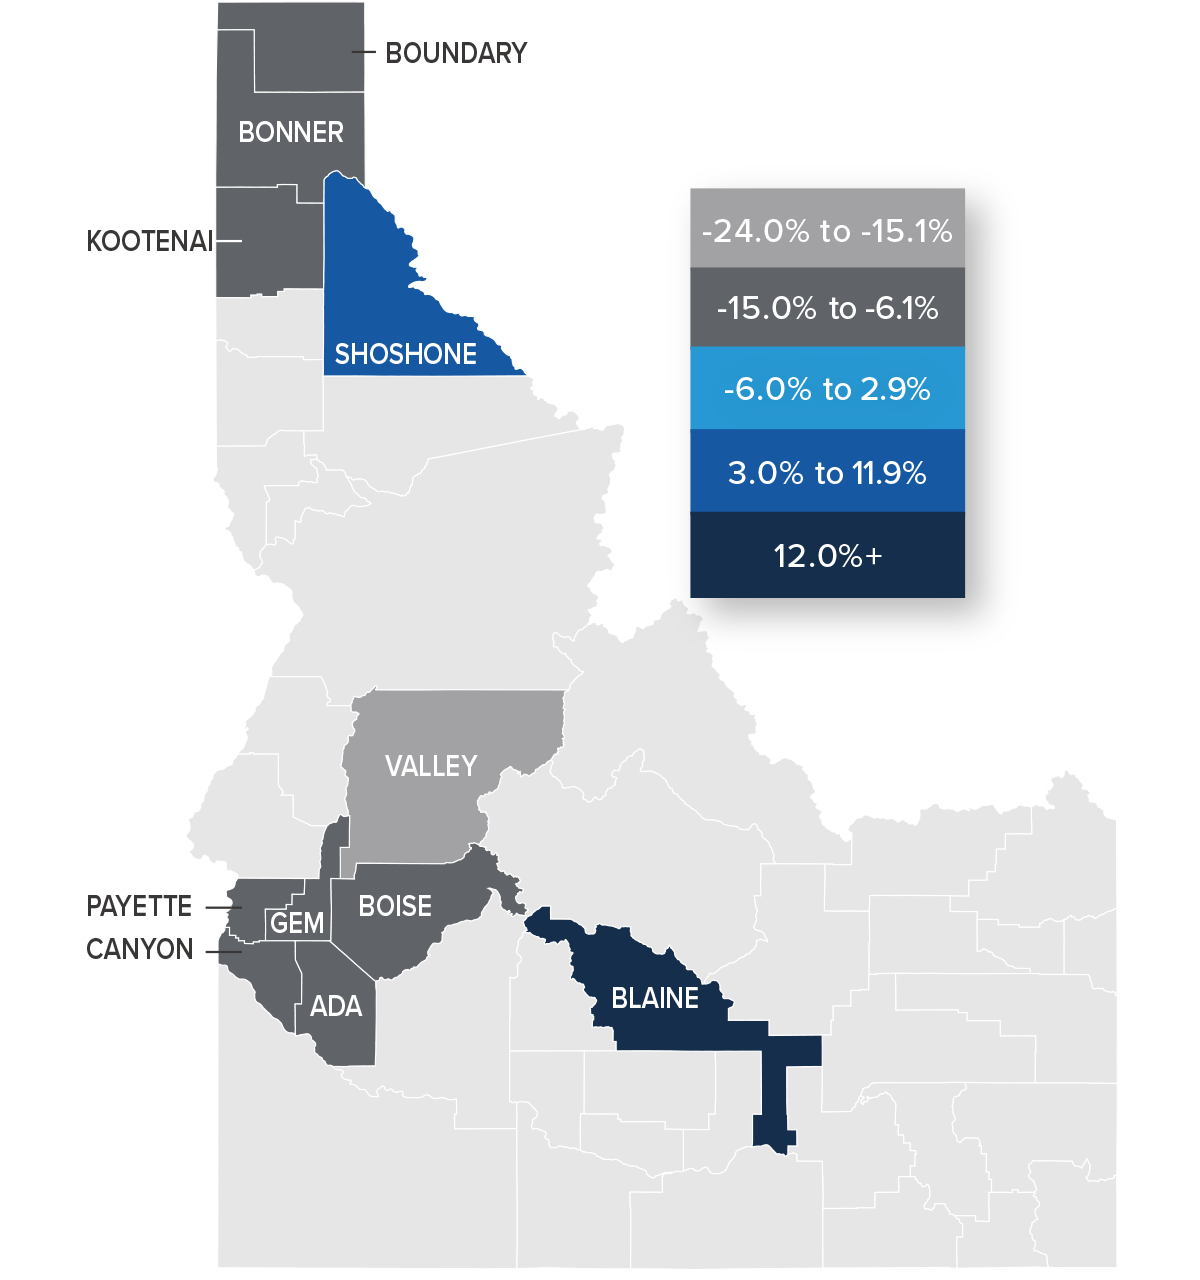 A map showing the real estate home prices percentage changes for various counties in North and South Idaho. Different colors correspond to different tiers of percentage change. Valley County had a percentage change in the -24% to -15.1% range. Boundary, Bonner, Kootenai, Boise, Gem, Payette, Canyon, and Ada were in the -15% to -6.1% change range. Shoshone was in the 3% to 11.9% change range. Blain was the only county in the 12%+ change range.